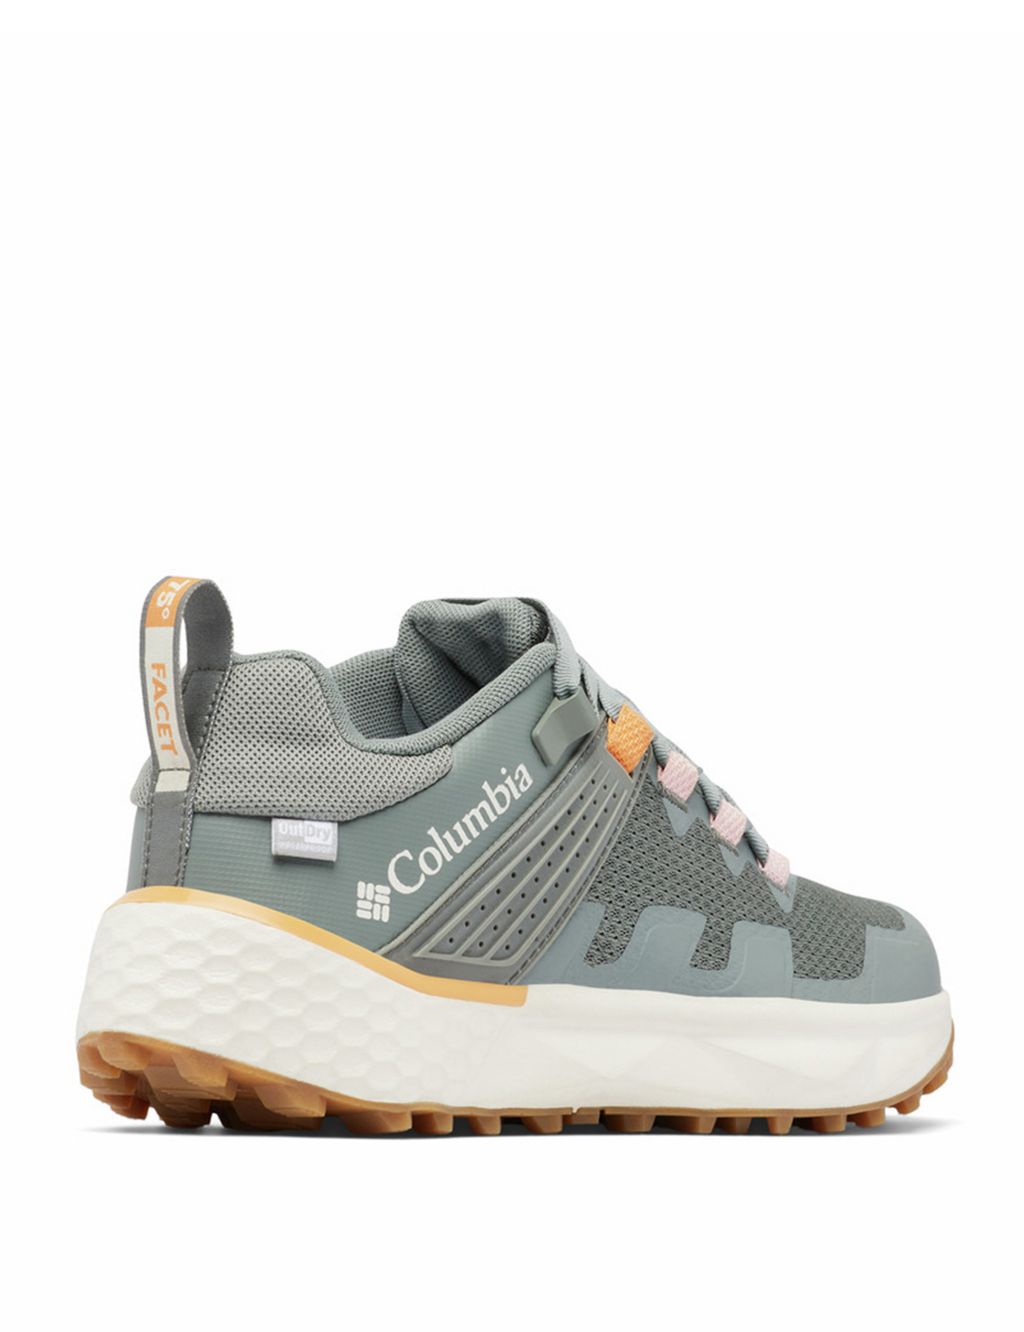 Facet 75 Outdry Waterproof Walking Shoes image 3